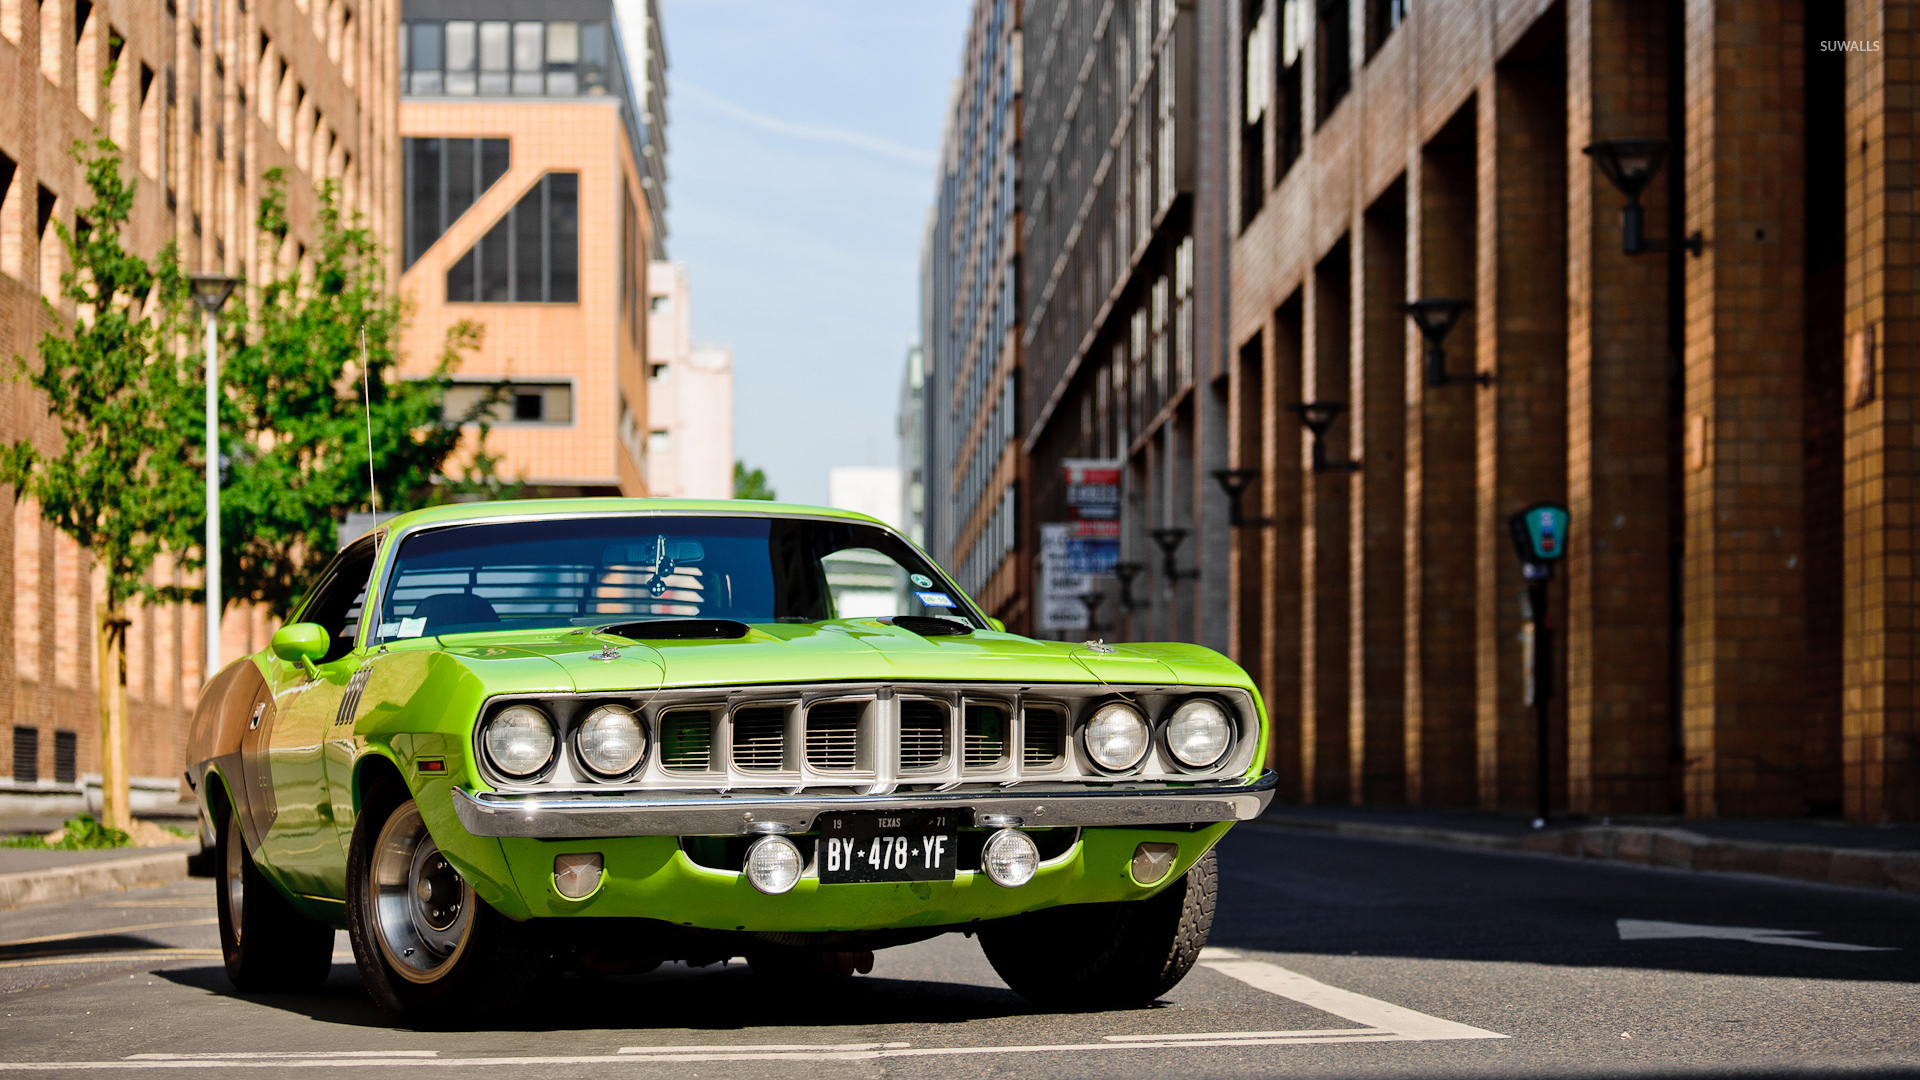 1971 Plymouth Barracuda In The City Wallpaper Car HD Wallpapers Download Free Images Wallpaper [wallpaper981.blogspot.com]